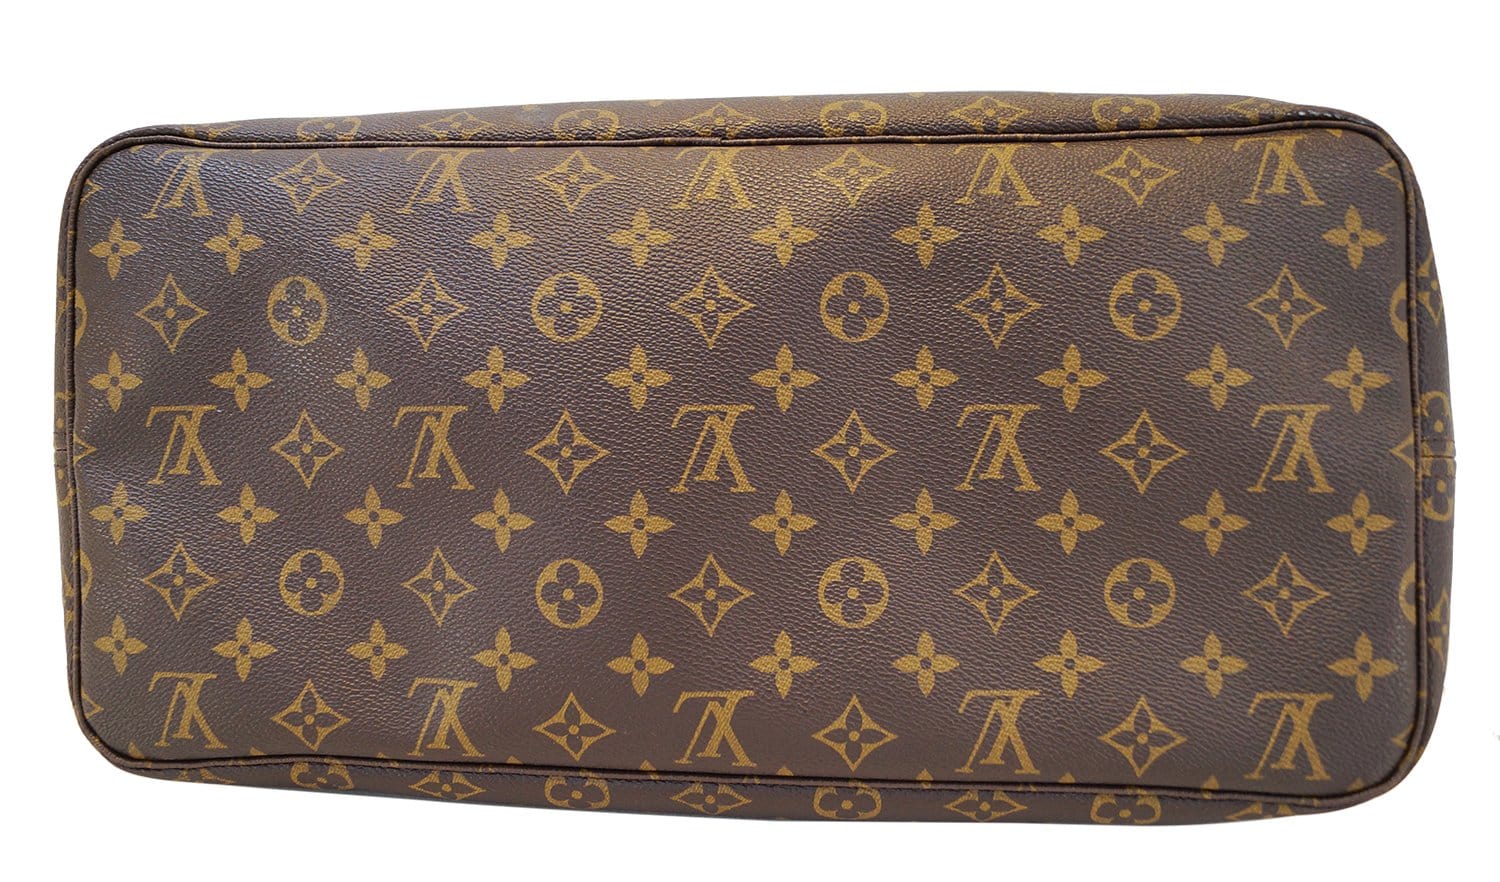  Louis Vuitton, Pre-Loved Pink Monogram Canvas Ikat Flower Neverfull  MM, Pink : Luxury Stores